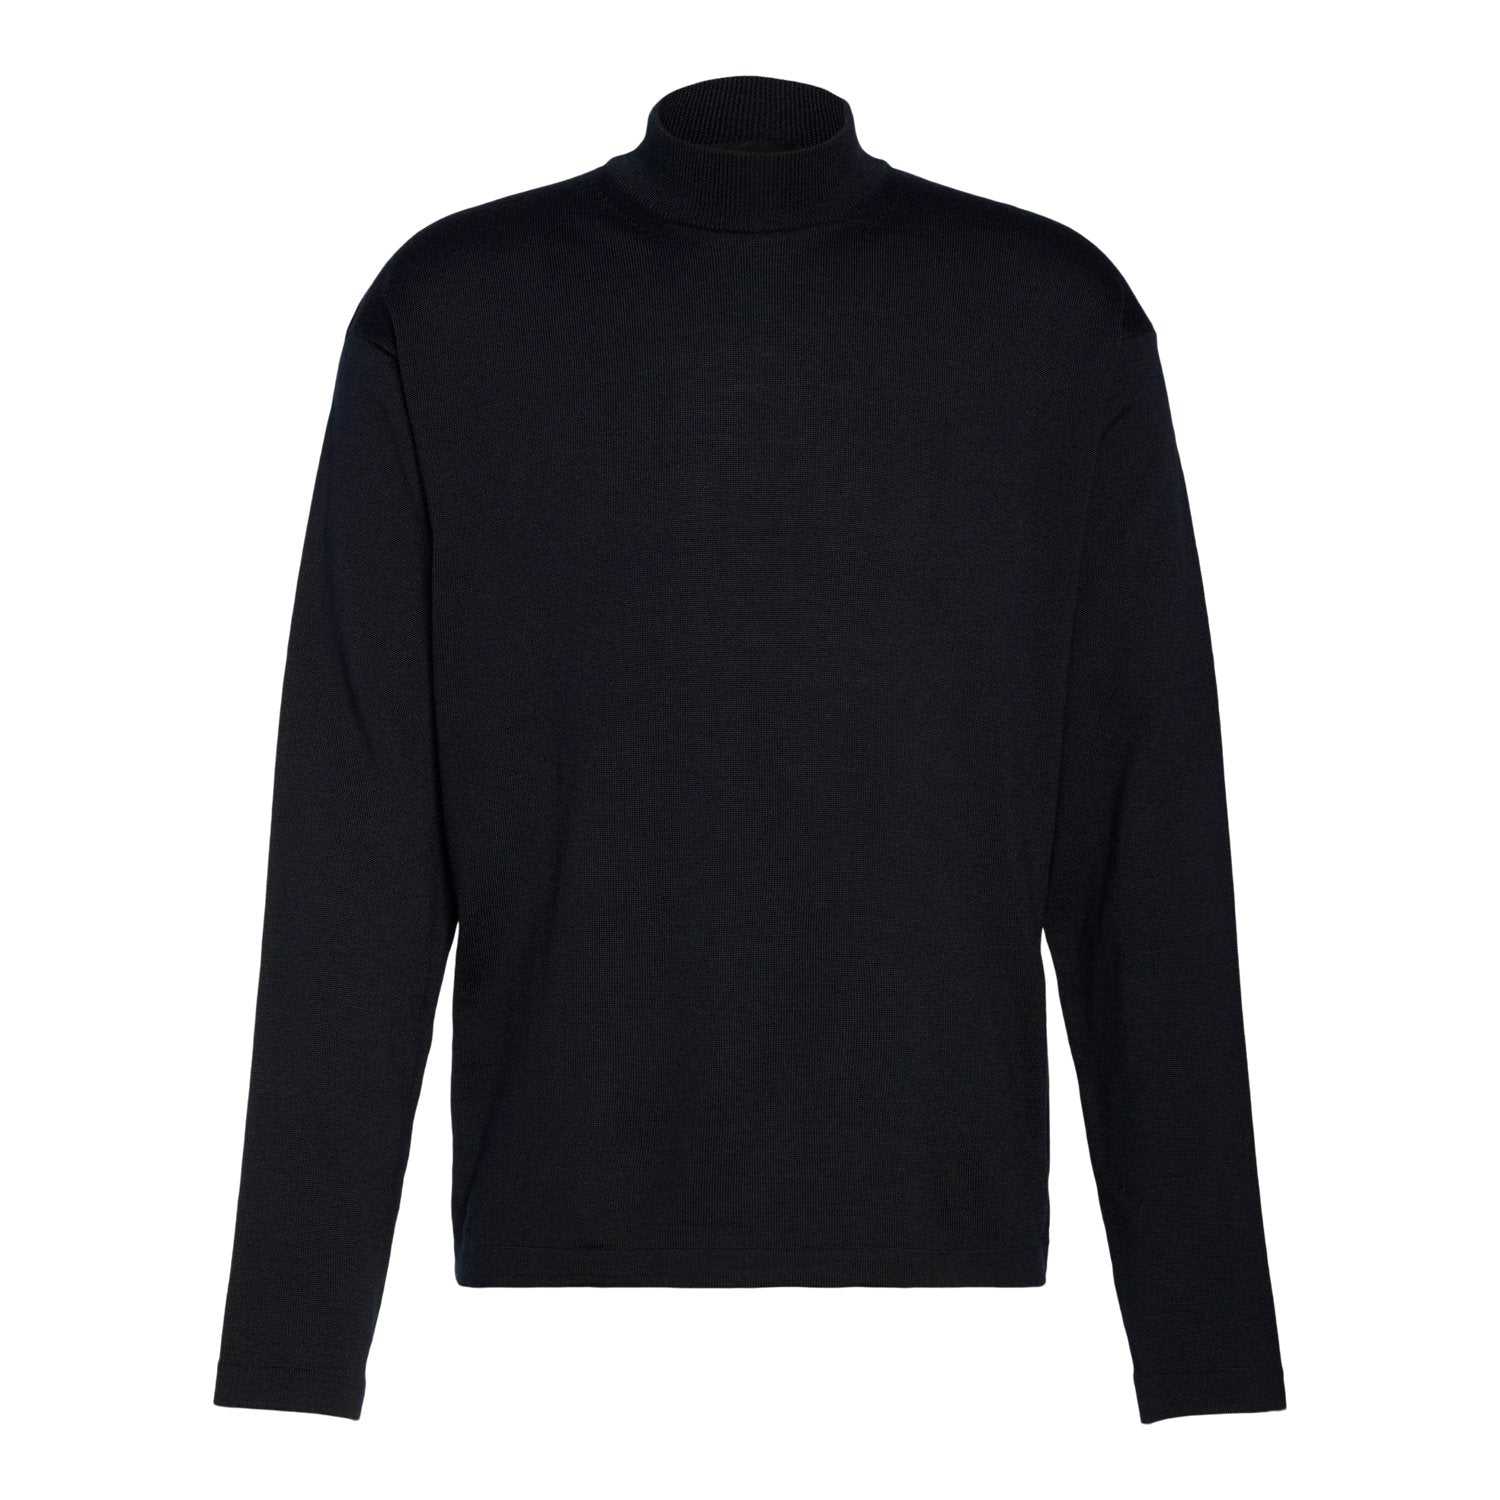 Lupetto Comfy Fit Merino Wool Sweater